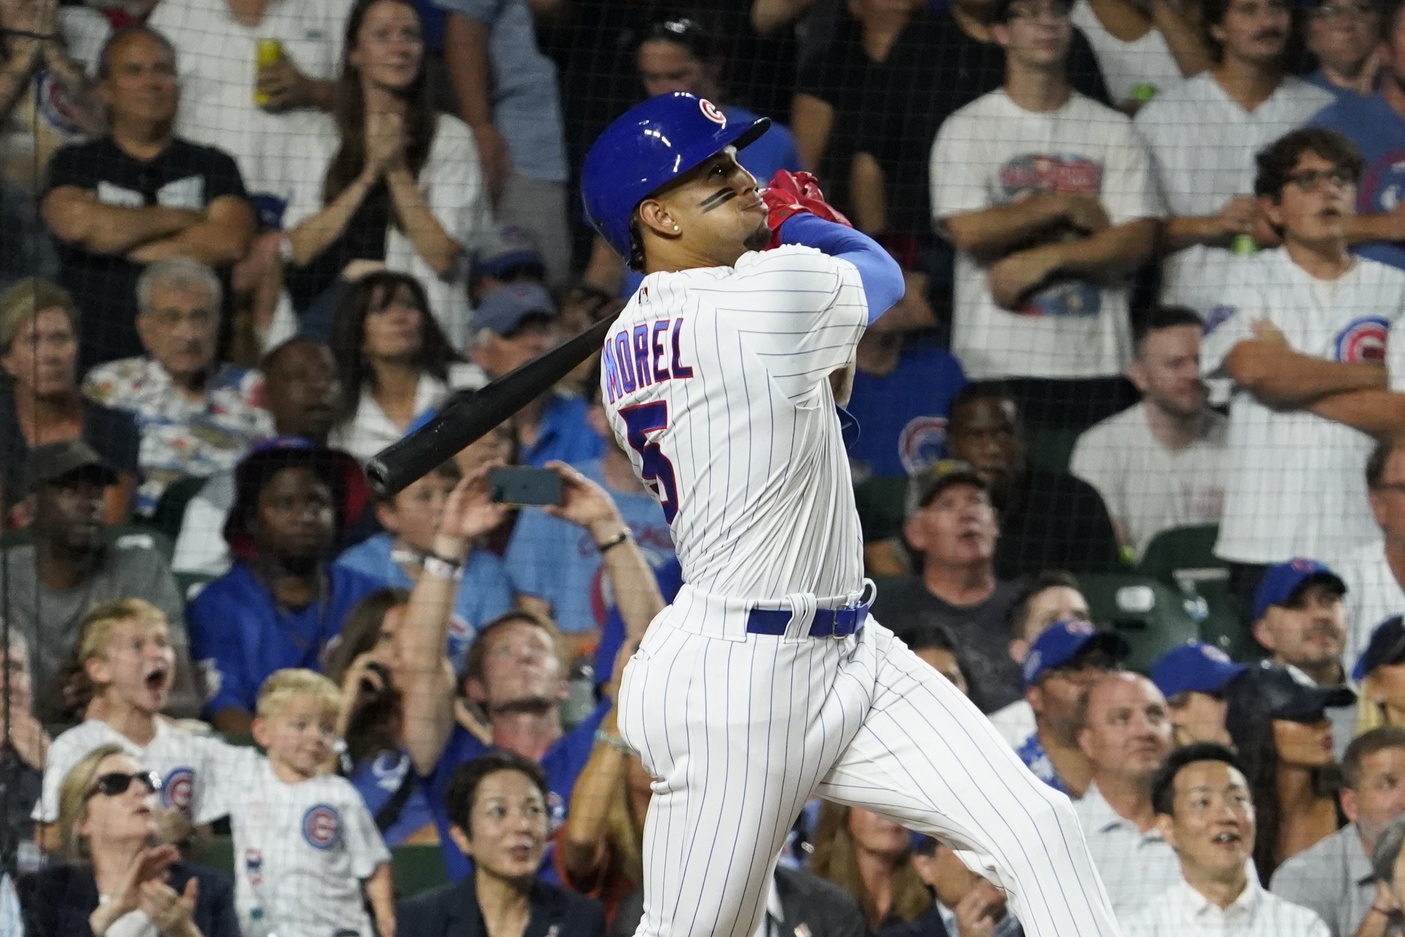 Christopher Morel HOME RUN wins it for the Chicago Cubs! 